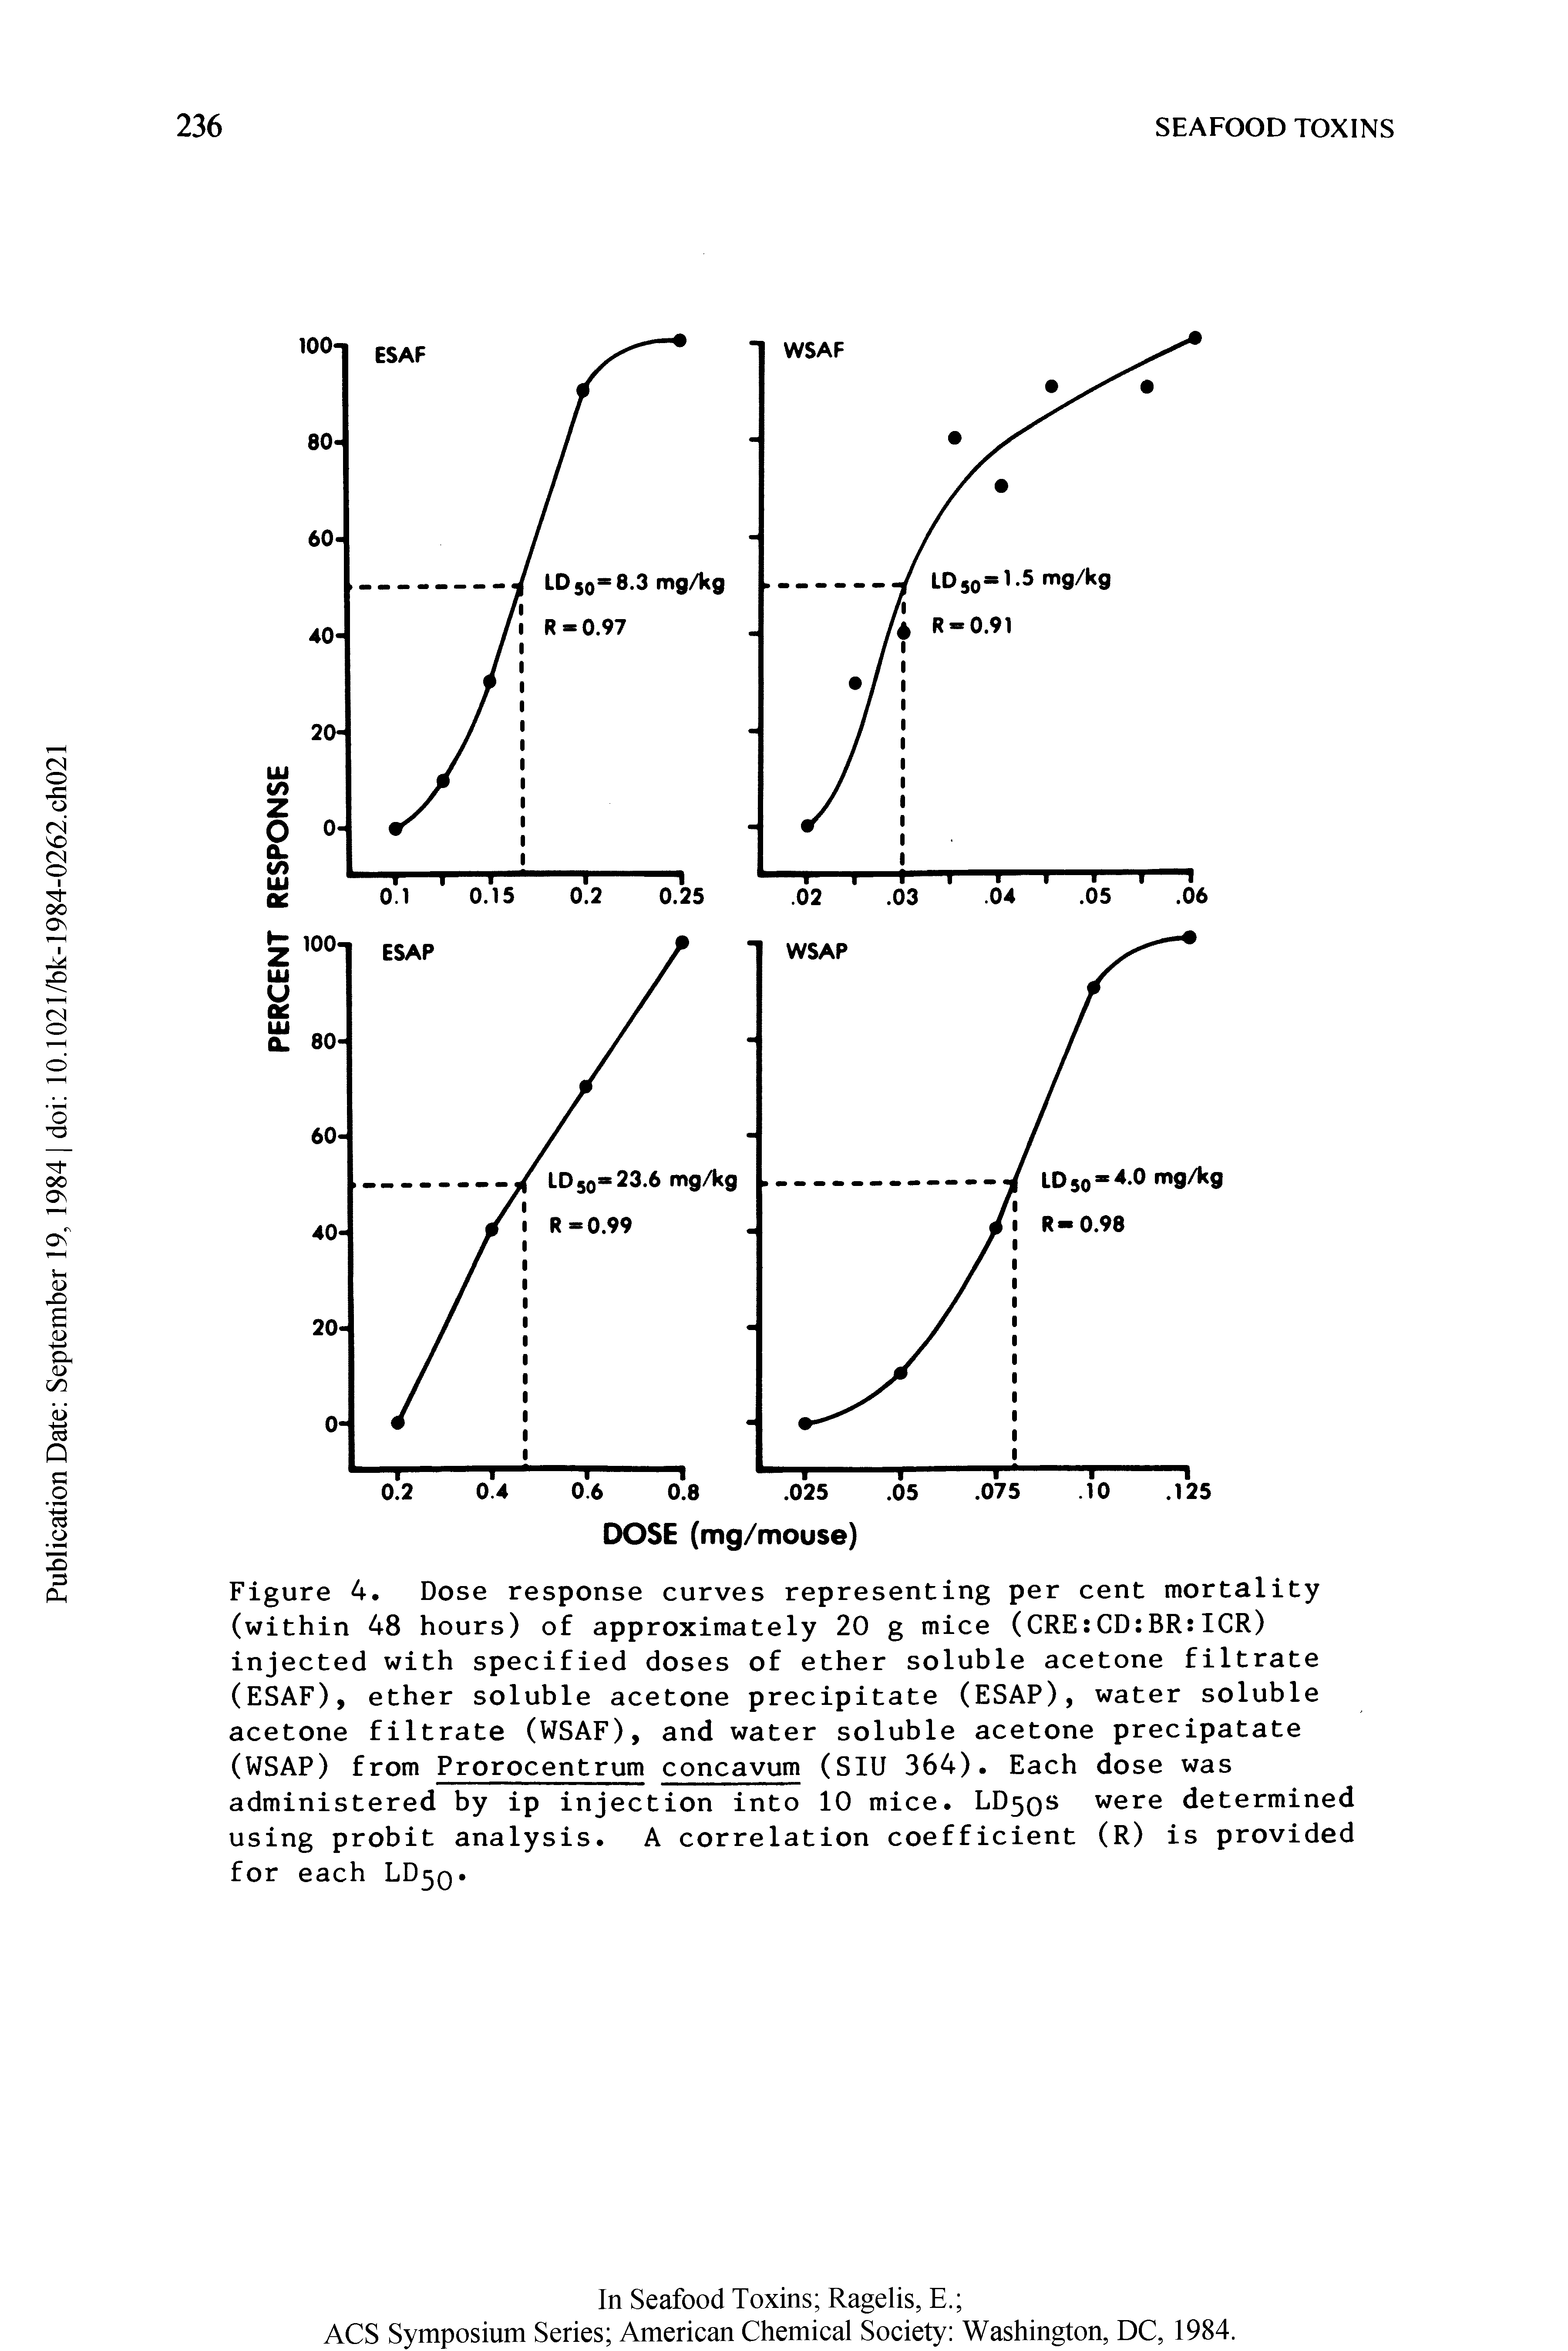 Figure 4. Dose response curves representing per cent mortality (within 48 hours) of approximately 20 g mice (CRE CD BR ICR) injected with specified doses of ether soluble acetone filtrate (ESAF), ether soluble acetone precipitate (ESAP), water soluble acetone filtrate (WSAF), and water soluble acetone precipatate (WSAP) from Prorocentrum concavum (SIU 364). Each dose was administered by ip injection into 10 mice. LD50S were determined using probit analysis. A correlation coefficient (R) is provided for each LD5Q.